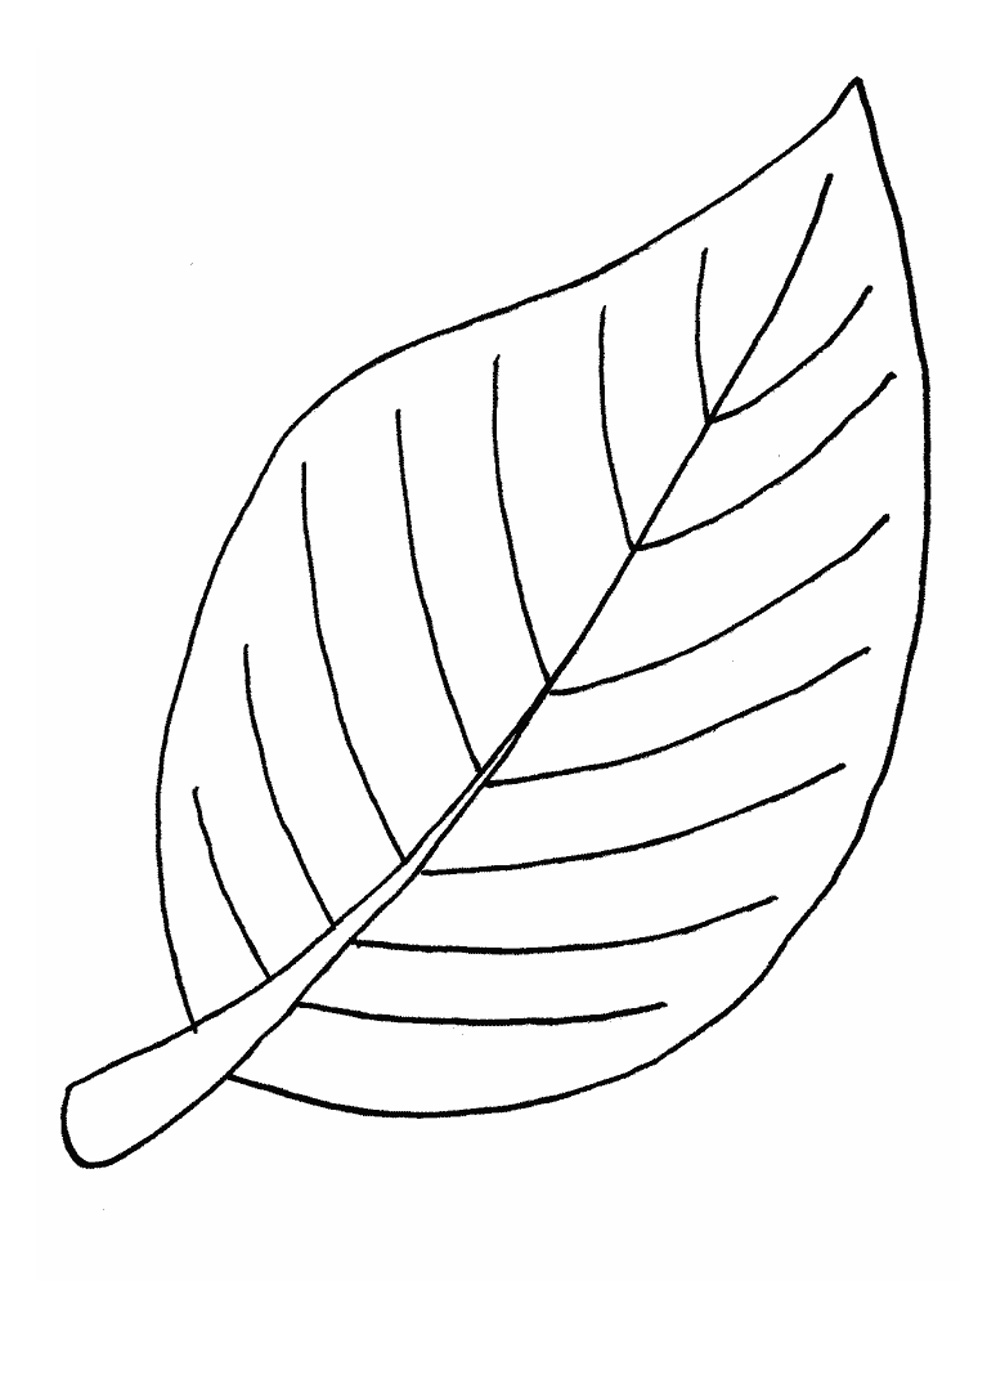 Coloring Pages | Leaf Coloring Pages A4 Size for Kids